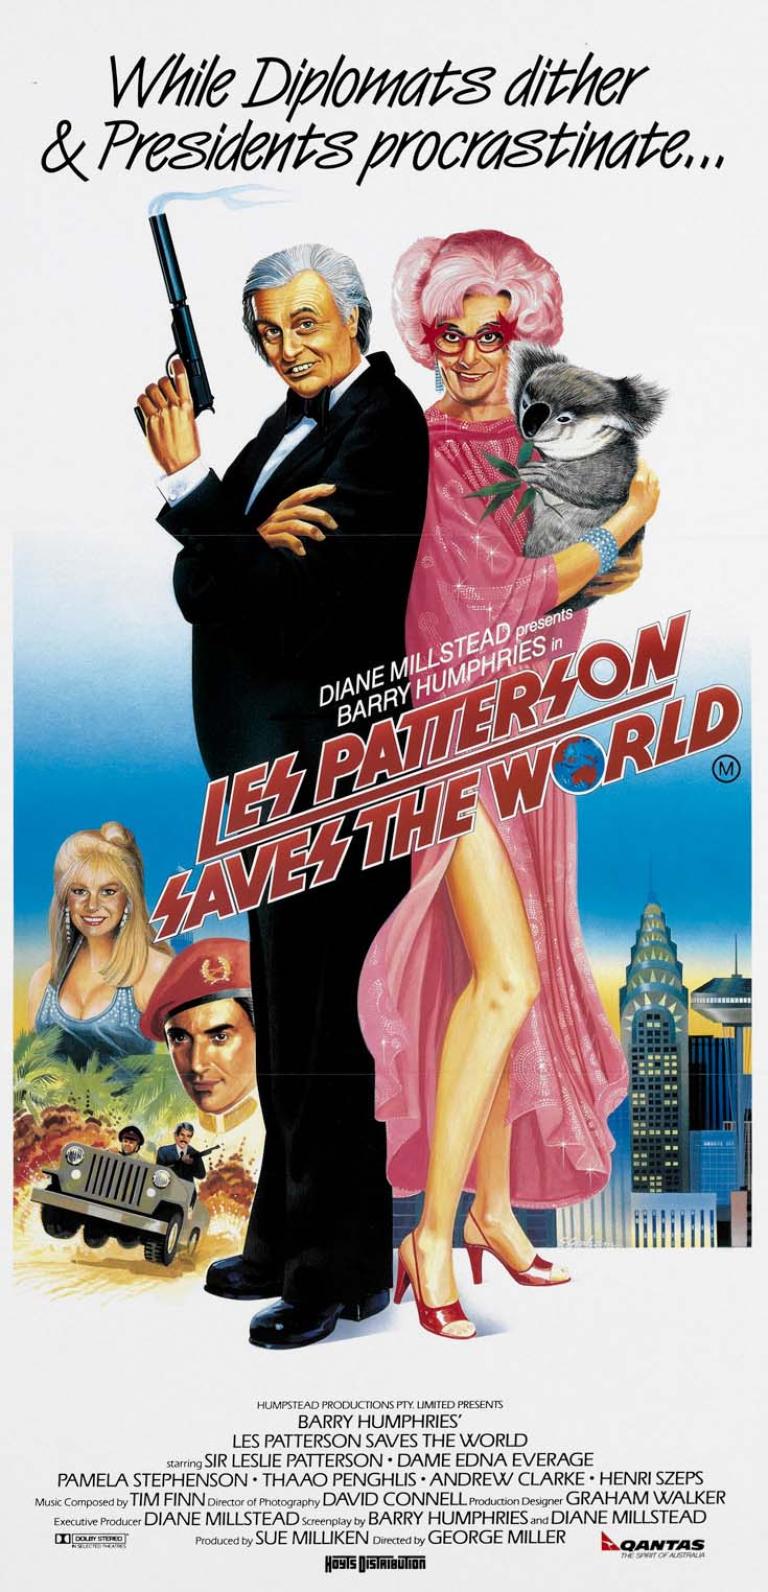 Daybill poster for Les Patterson Saves the World depicting an illustration of Sir Les Patterson in a tuxedo holding a smoking gun and Dame Edna Everage holding a koala with a lot of leg showing in her pink dress.